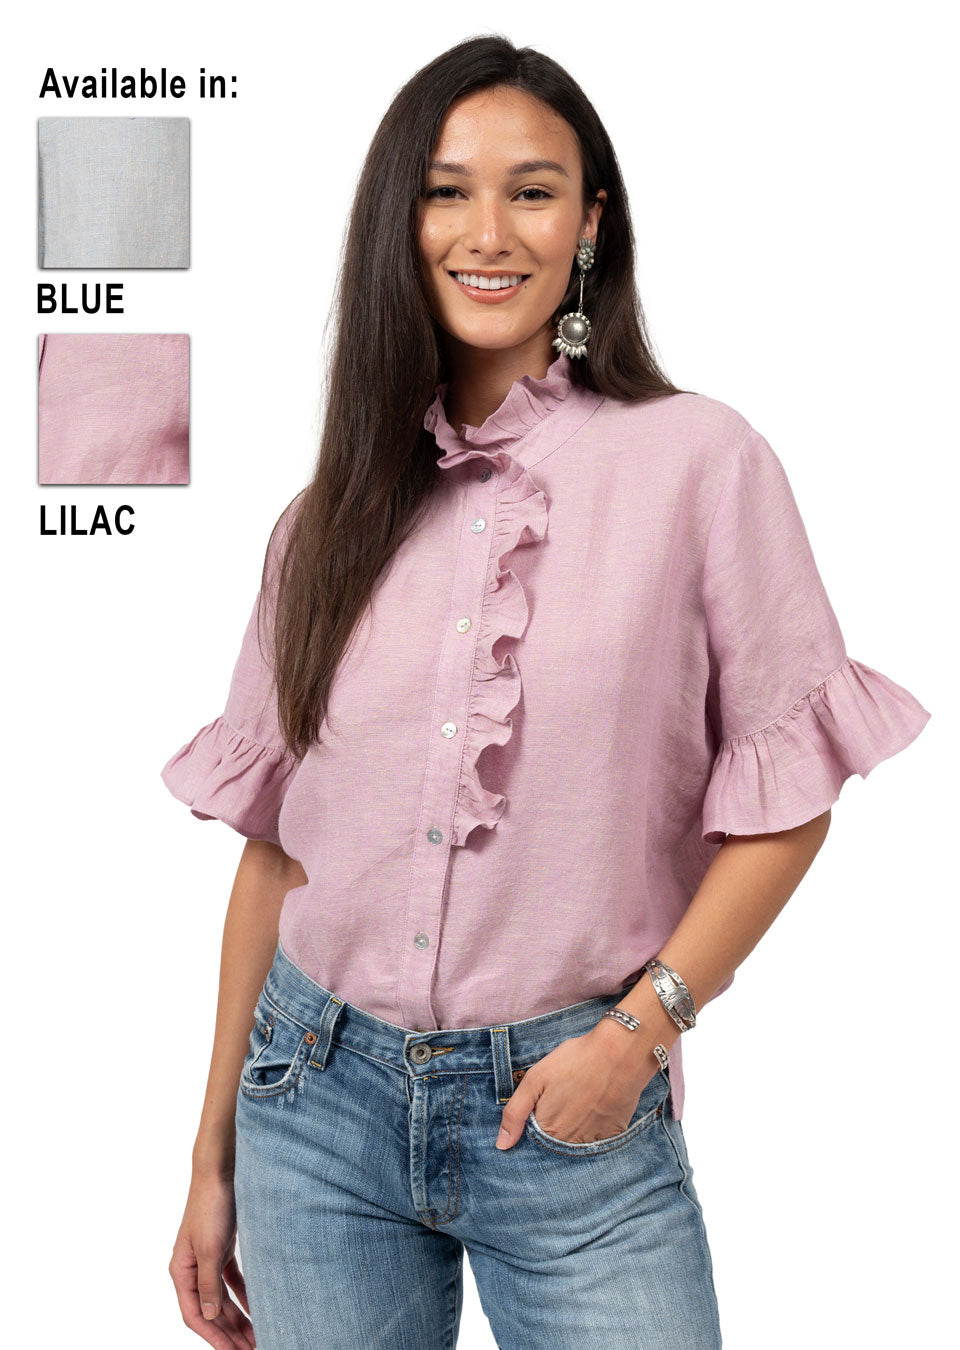 Ivy Jane Lilac Crossed Eyed Linen Top